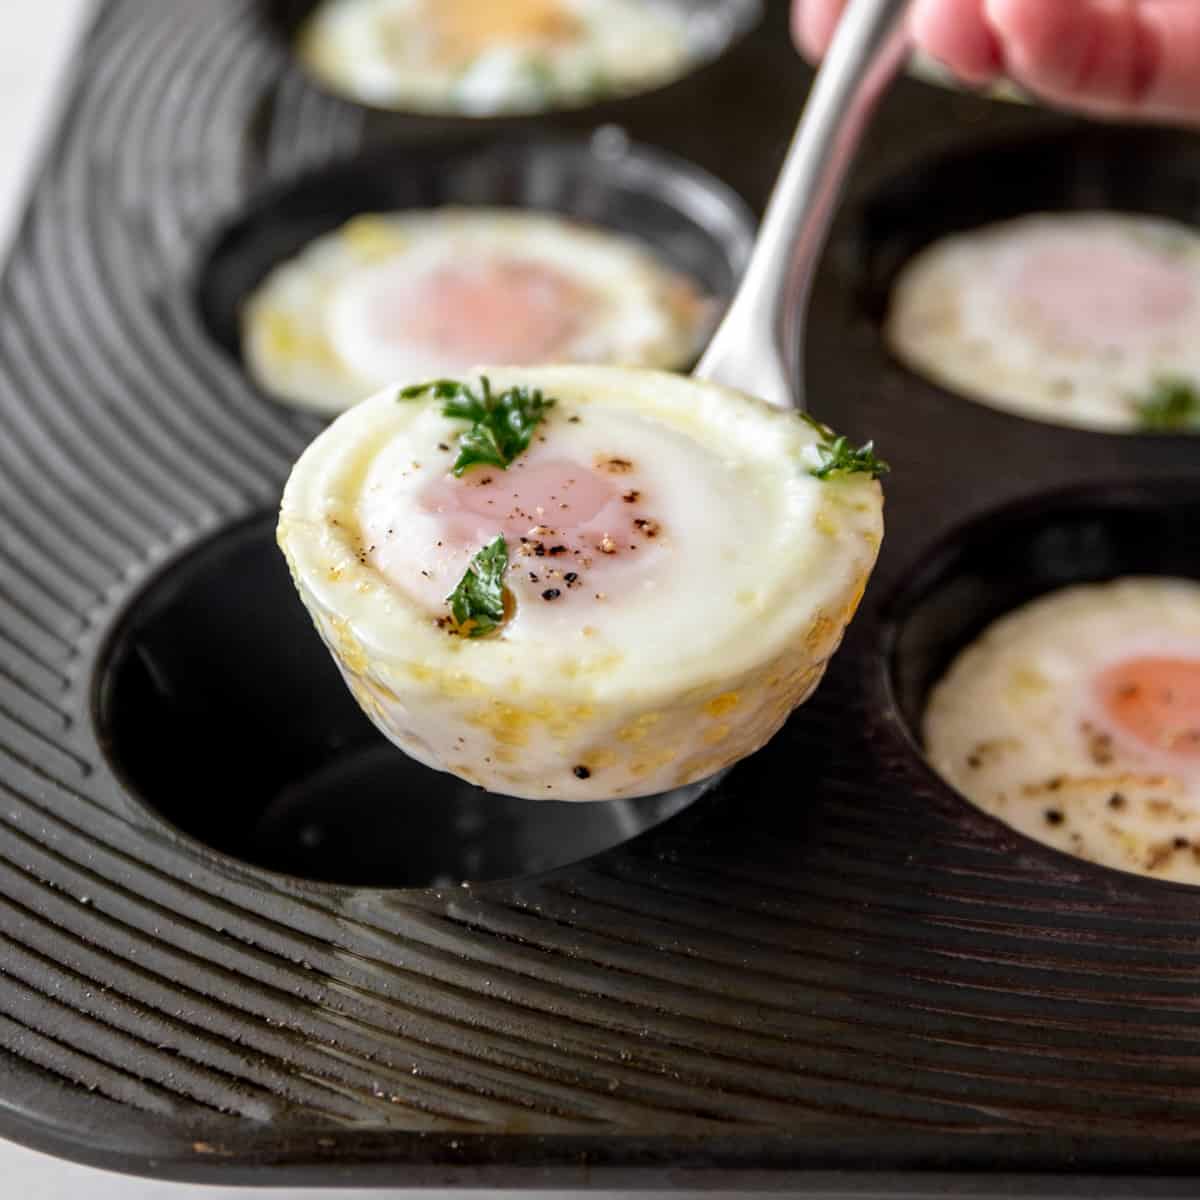 https://inquiringchef.com/wp-content/uploads/2013/03/Muffin-Pan-Herb-Baked-Eggs_square-1473.jpg